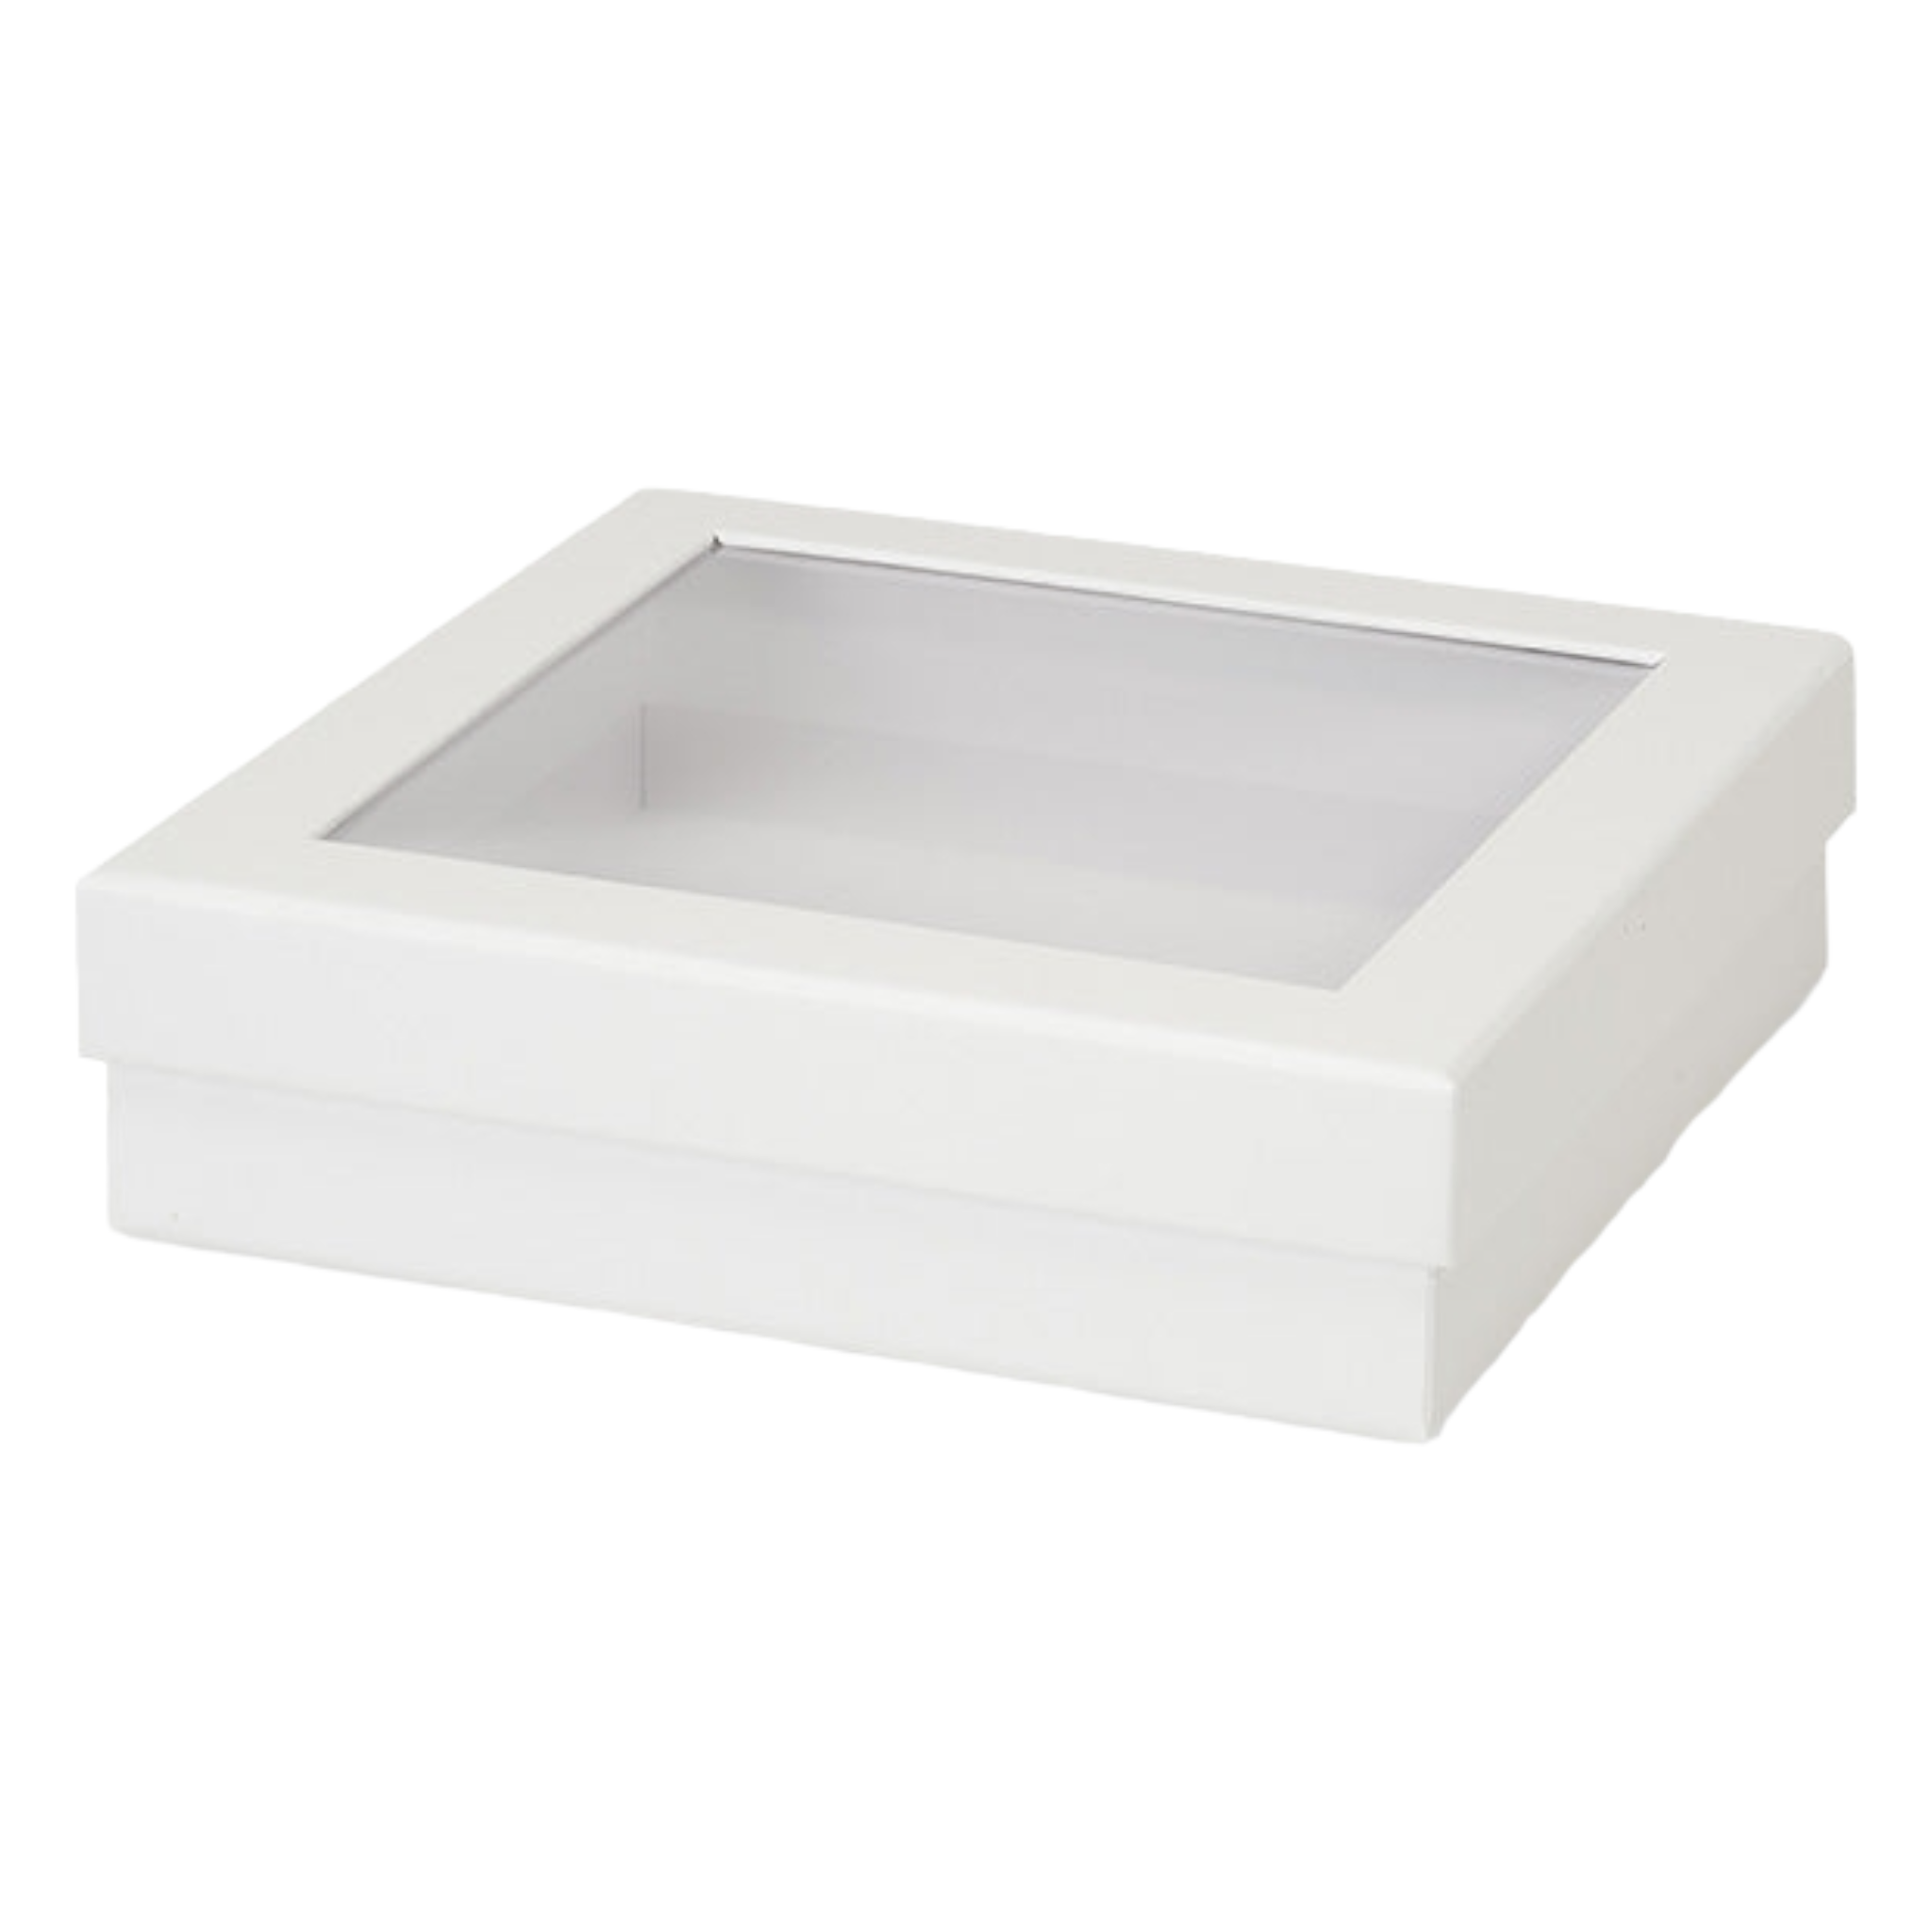 Gift Biscuit Paper Box White 24x19x5cm XPP556